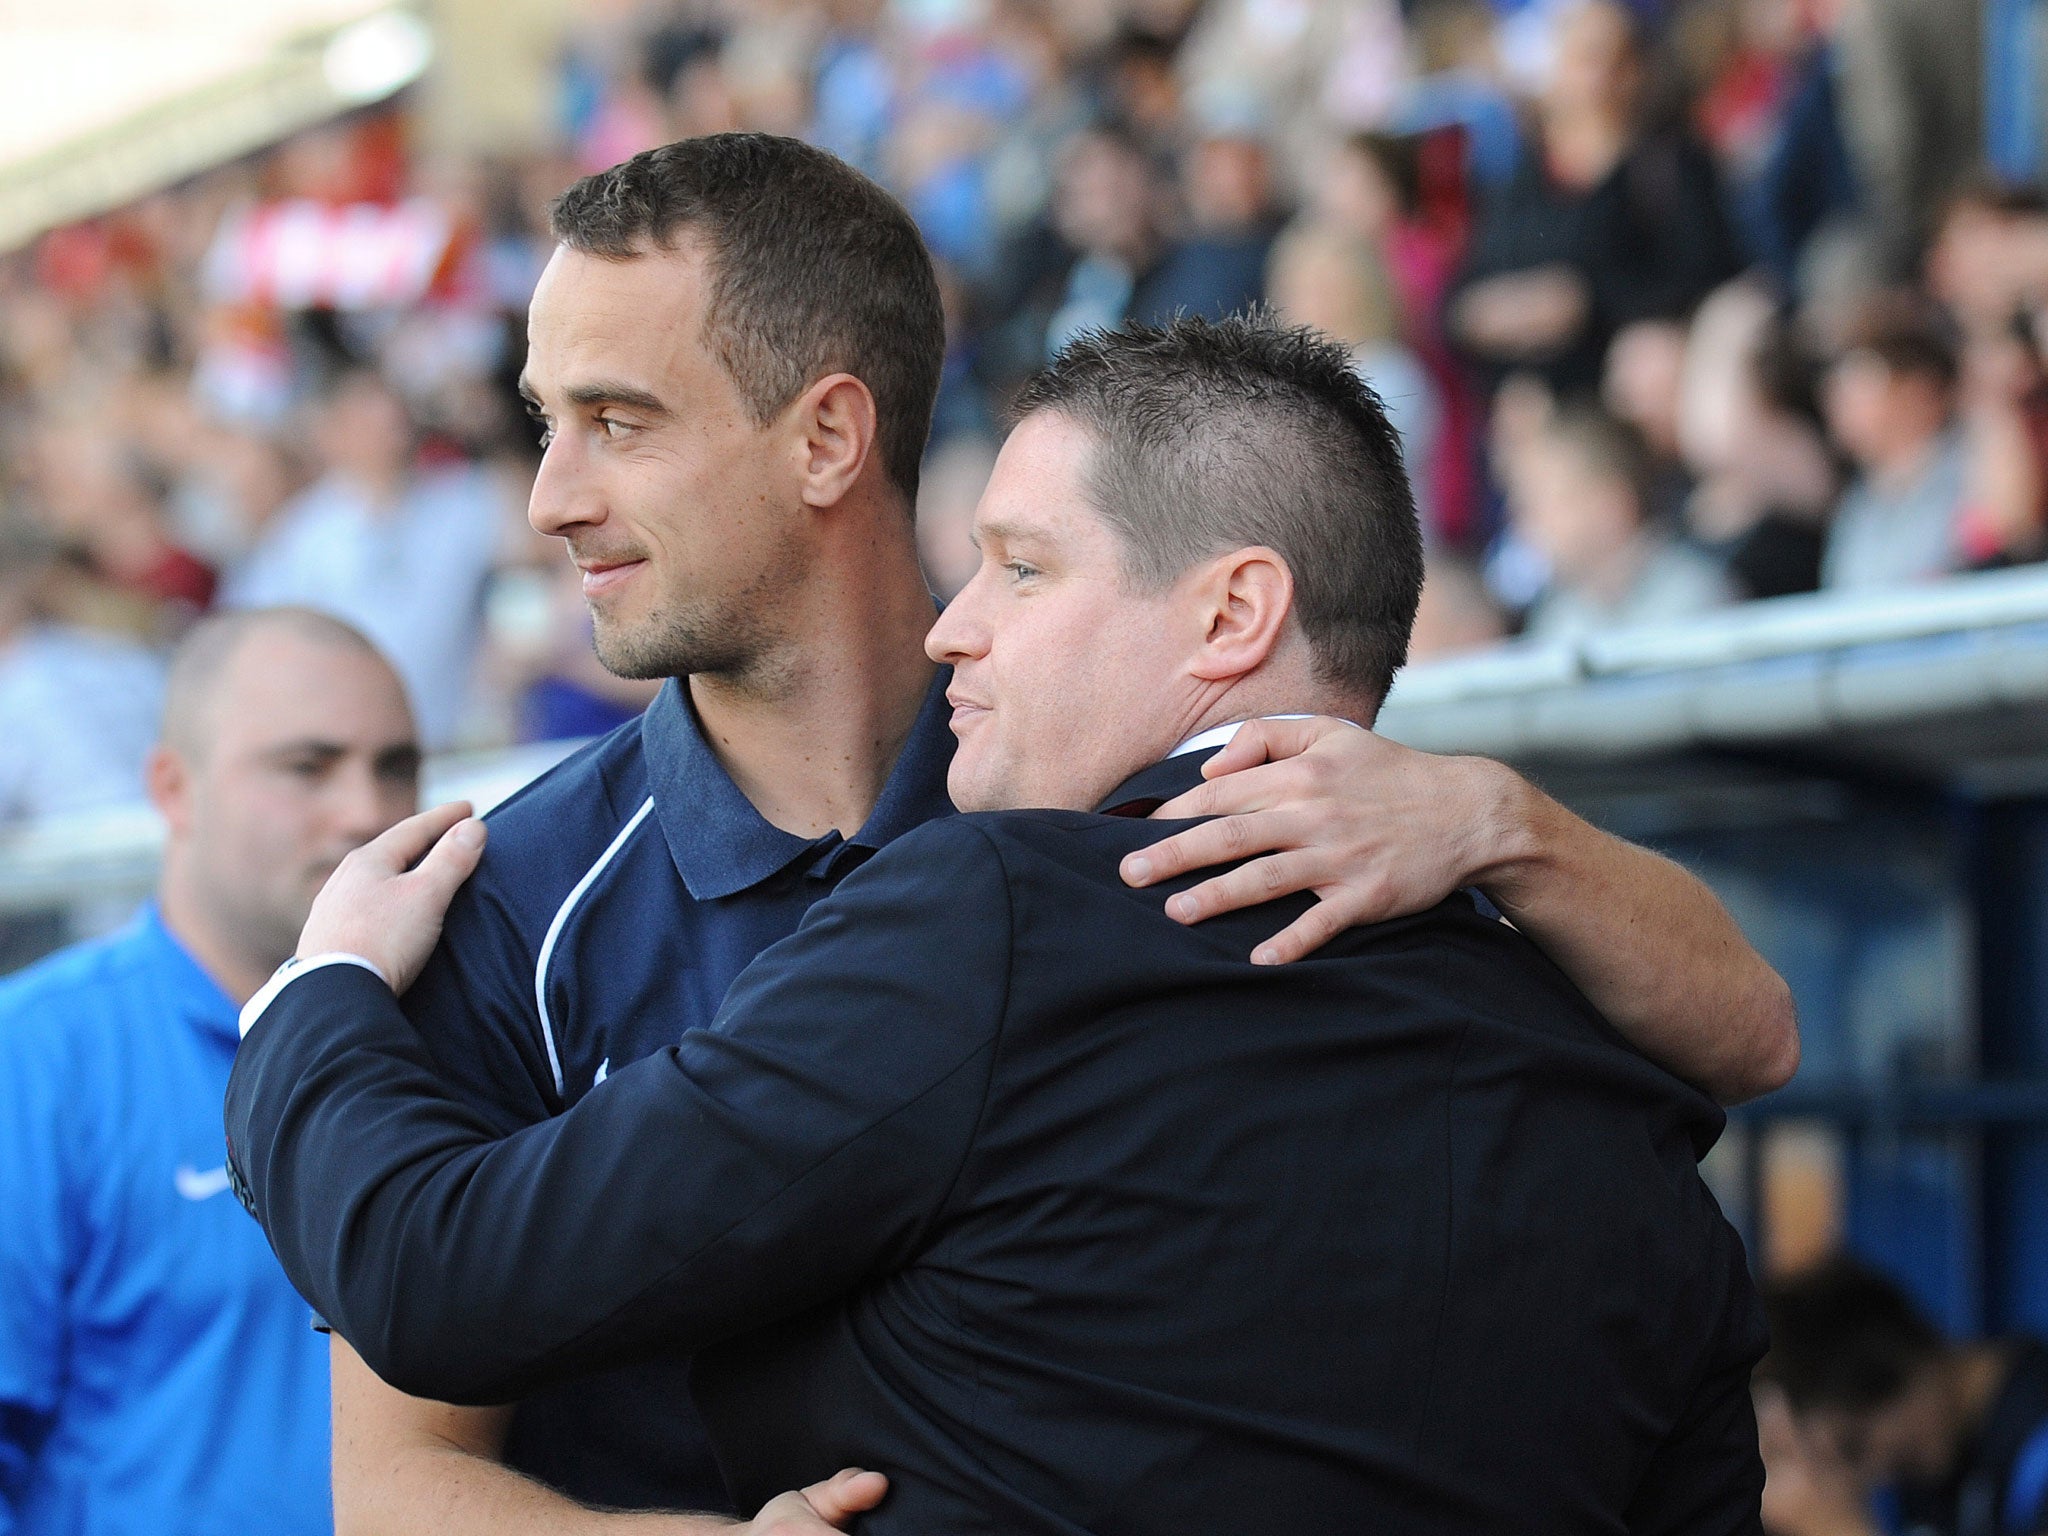 Mark Sampson, shown here sharing a hug with Liverpool Ladies manager Matt Beard, previously worked with Roberto Martinez at Swansea City's centre of excellence